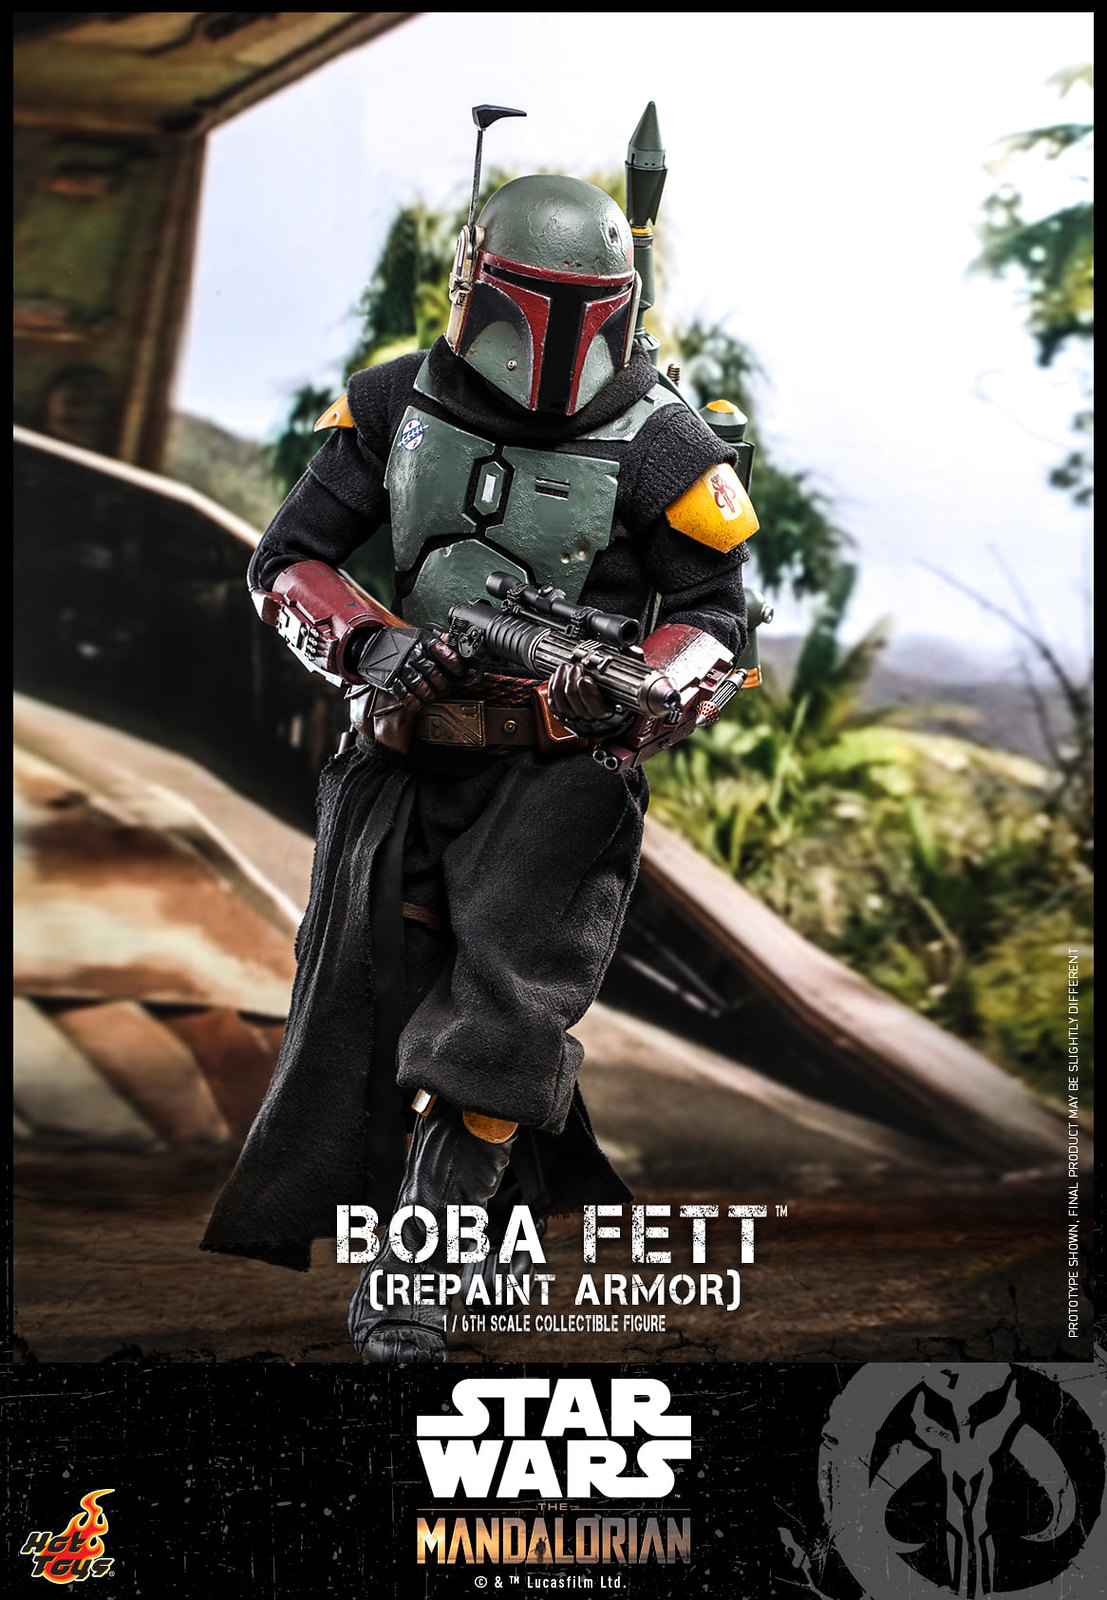 Star Wars: The Mandalorian™ - 1/6th scale Boba Fett™ (Repaint Armor) Collectible figure/ figure and Throne Collectible Set 51312290365_3b9e649474_h